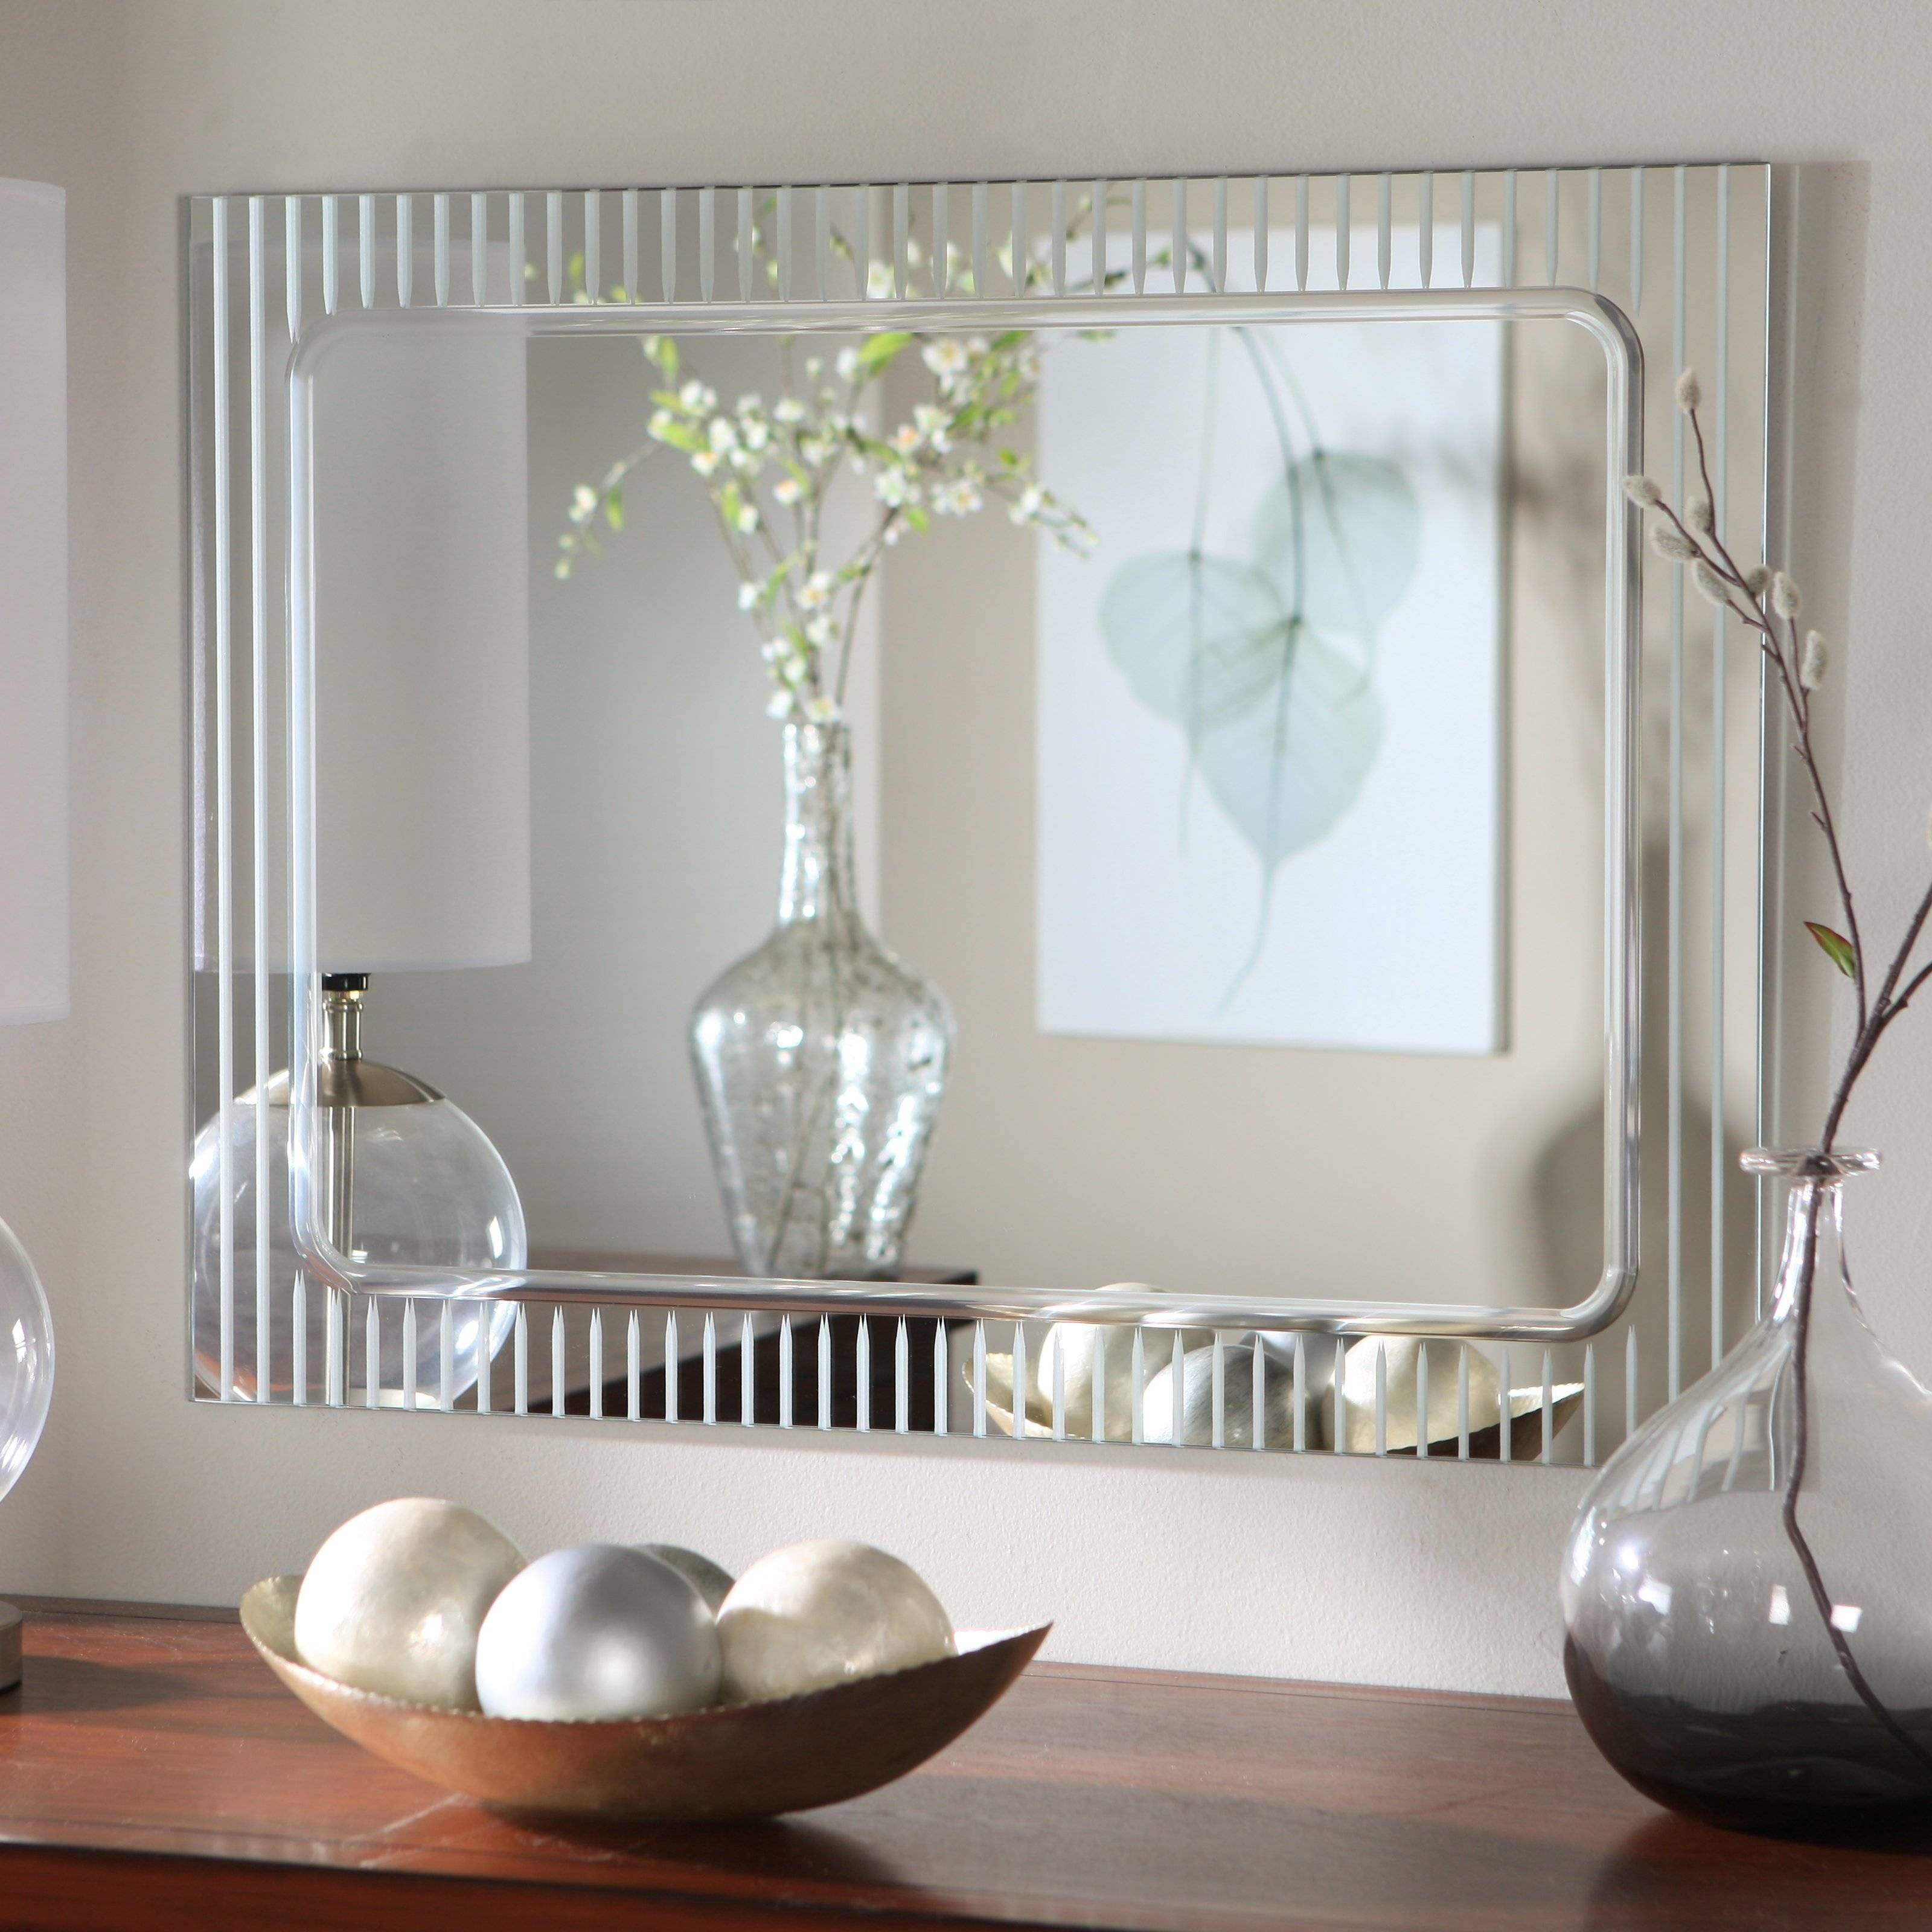 Explore Photos of Triple Oval Wall Mirrors (Showing 19 of 25 Photos)